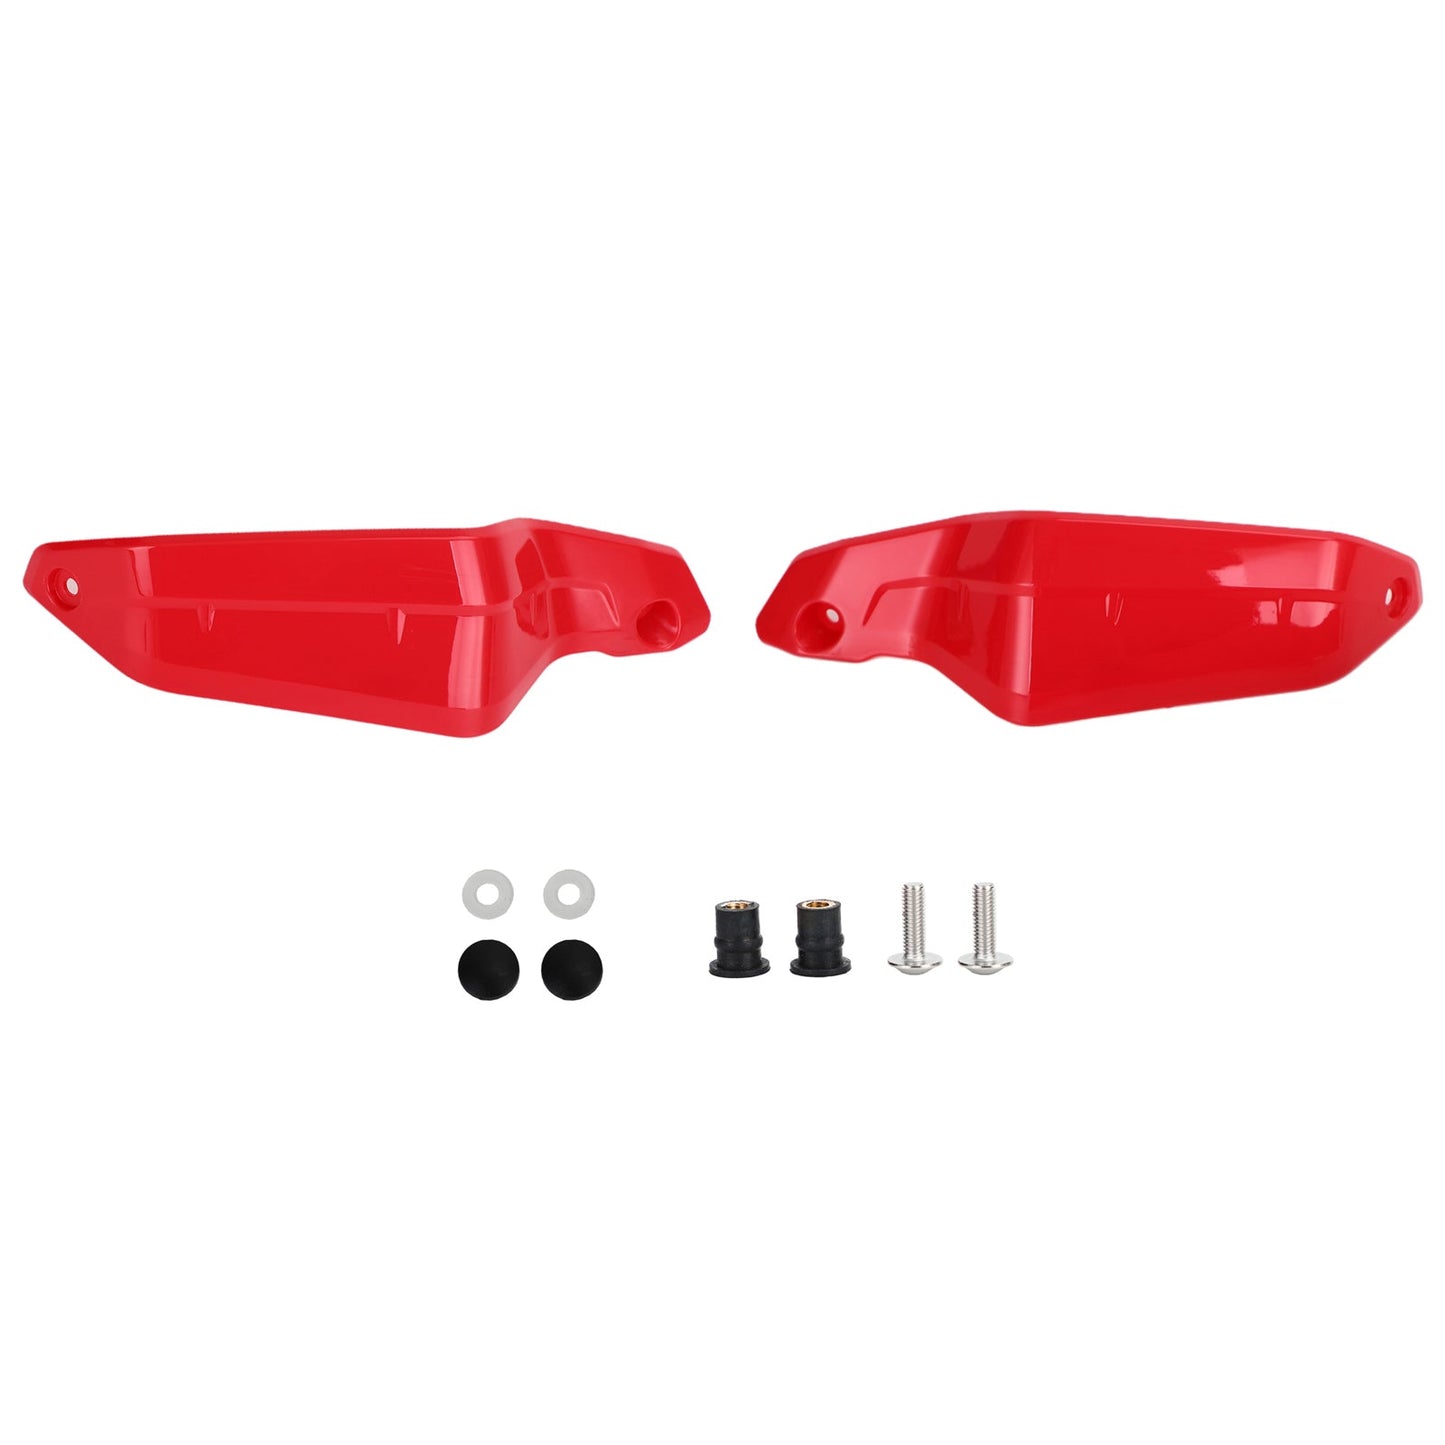 Handguard Extensions Hand Protector fit for Honda CRF1100L /ADV X-ADV750 2021